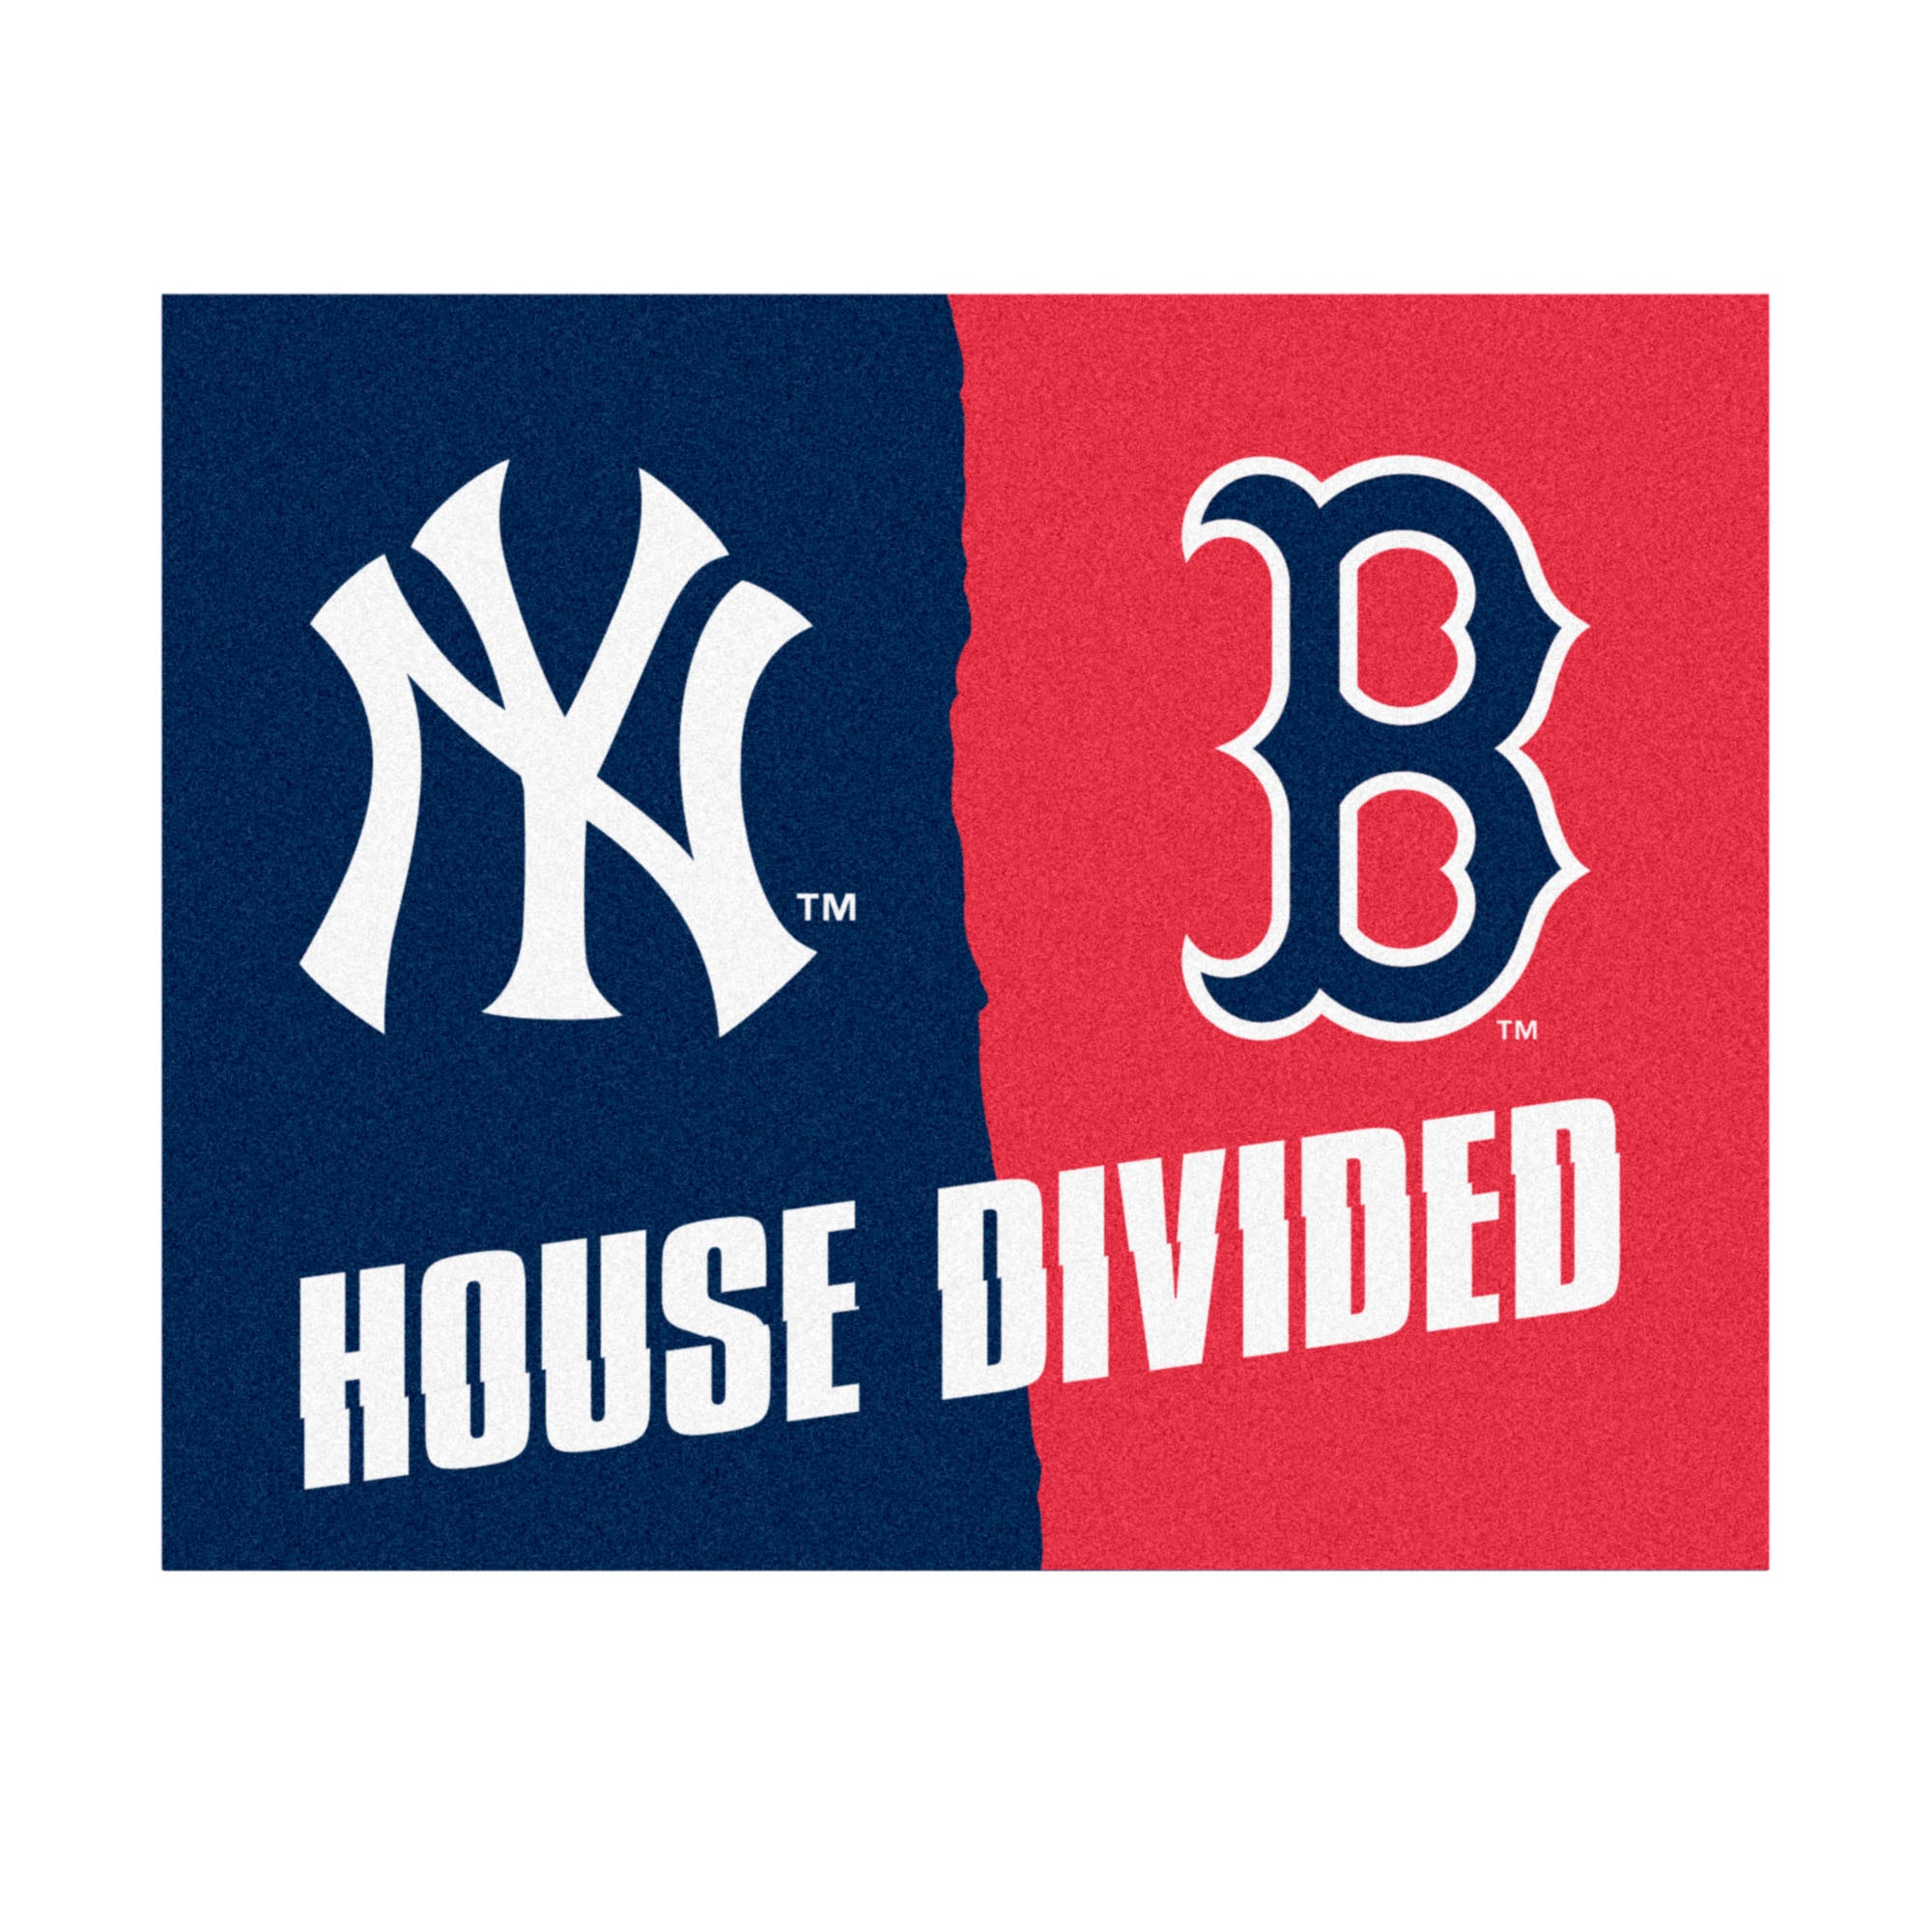 FANMATS, MLB House Divided - Yankees / Red Sox House Divided Rug